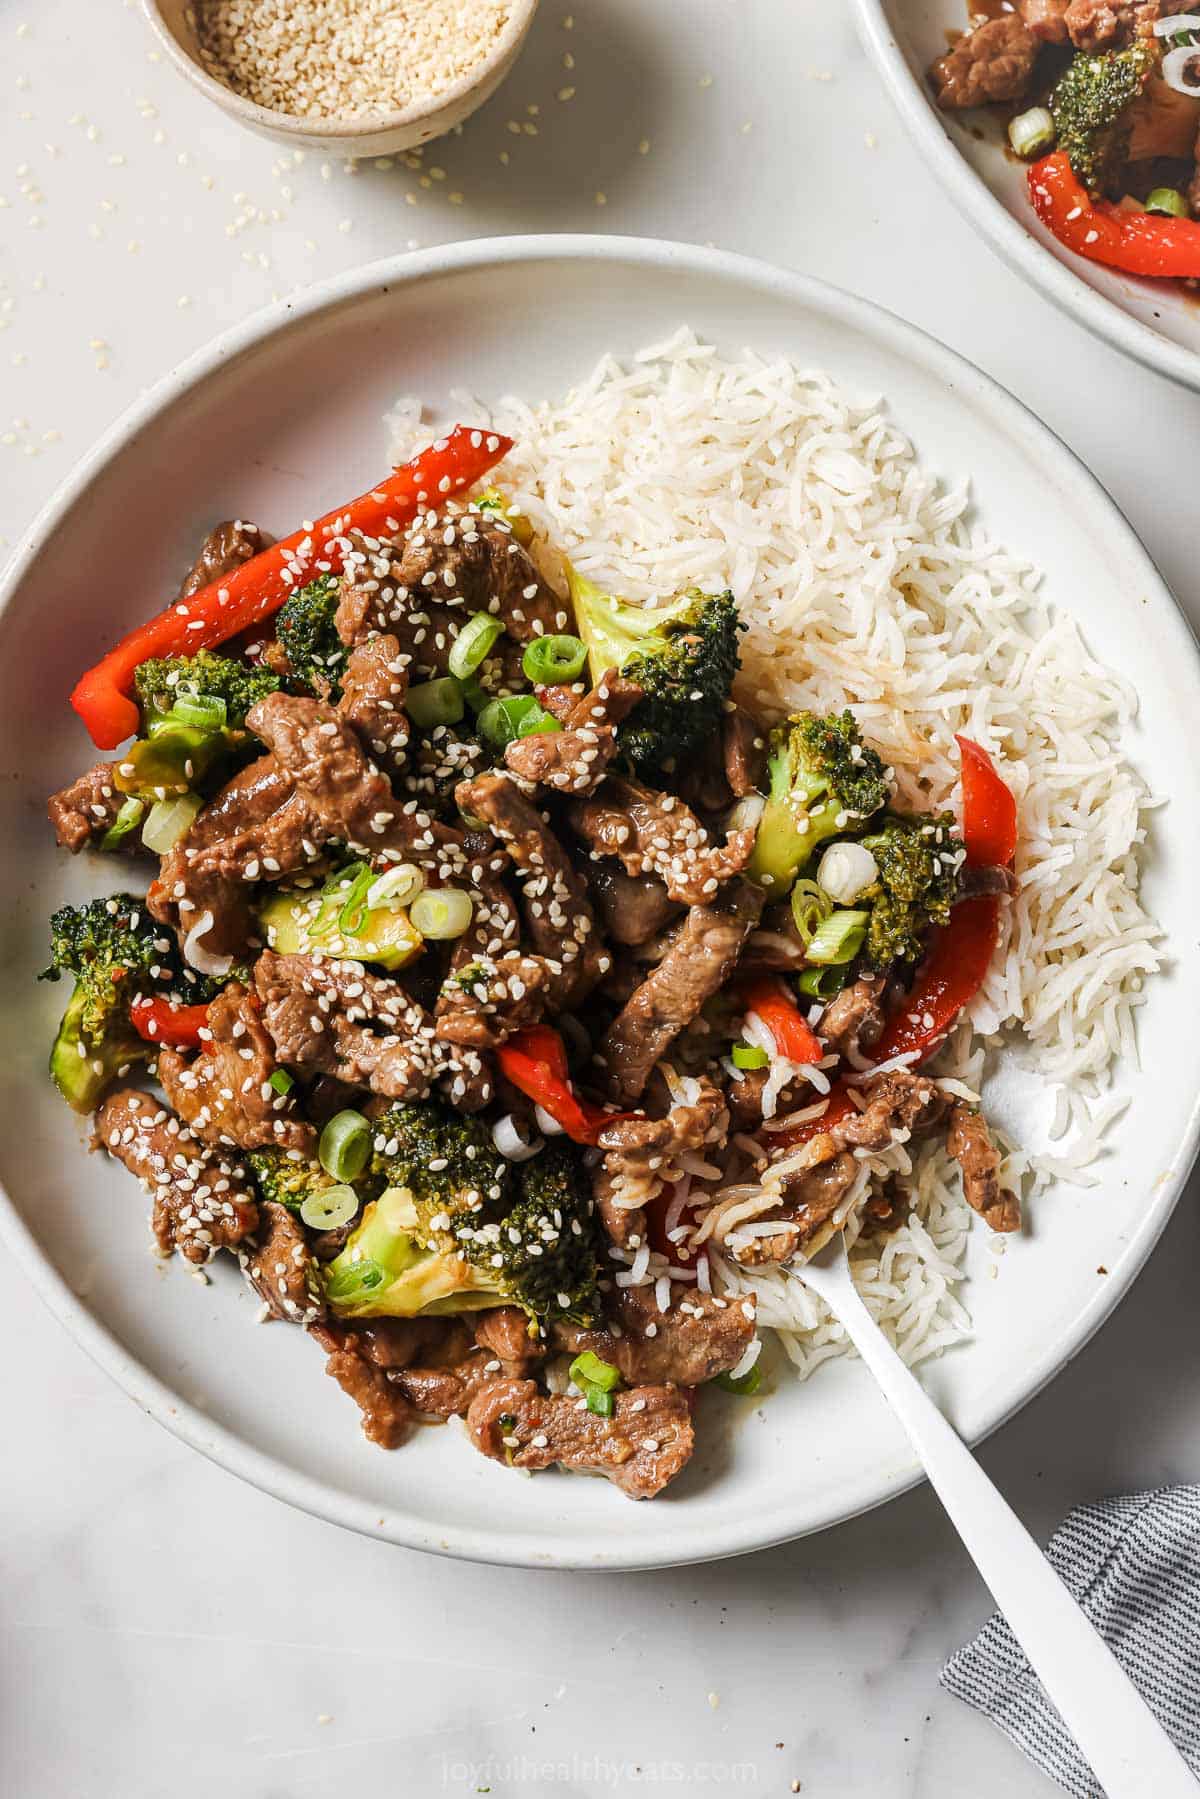 Beef and broccoli stir fry with rice noodles on the side.